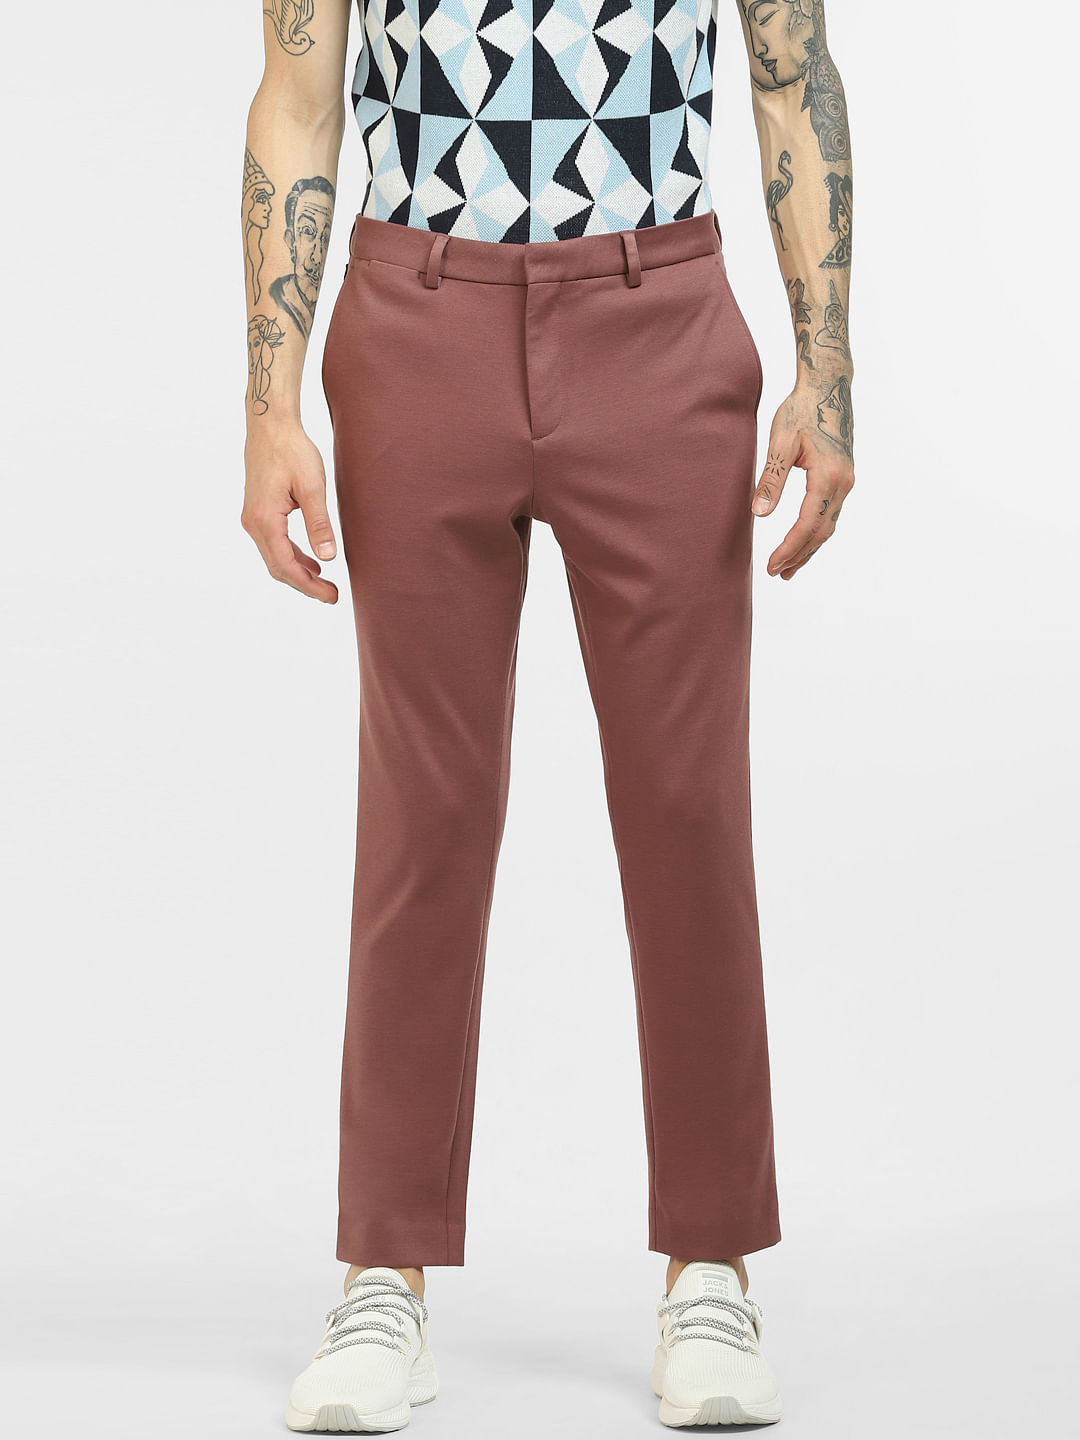 Buy AD by Arvind Light Brown Regular Fit Trousers for Men Online  Tata CLiQ